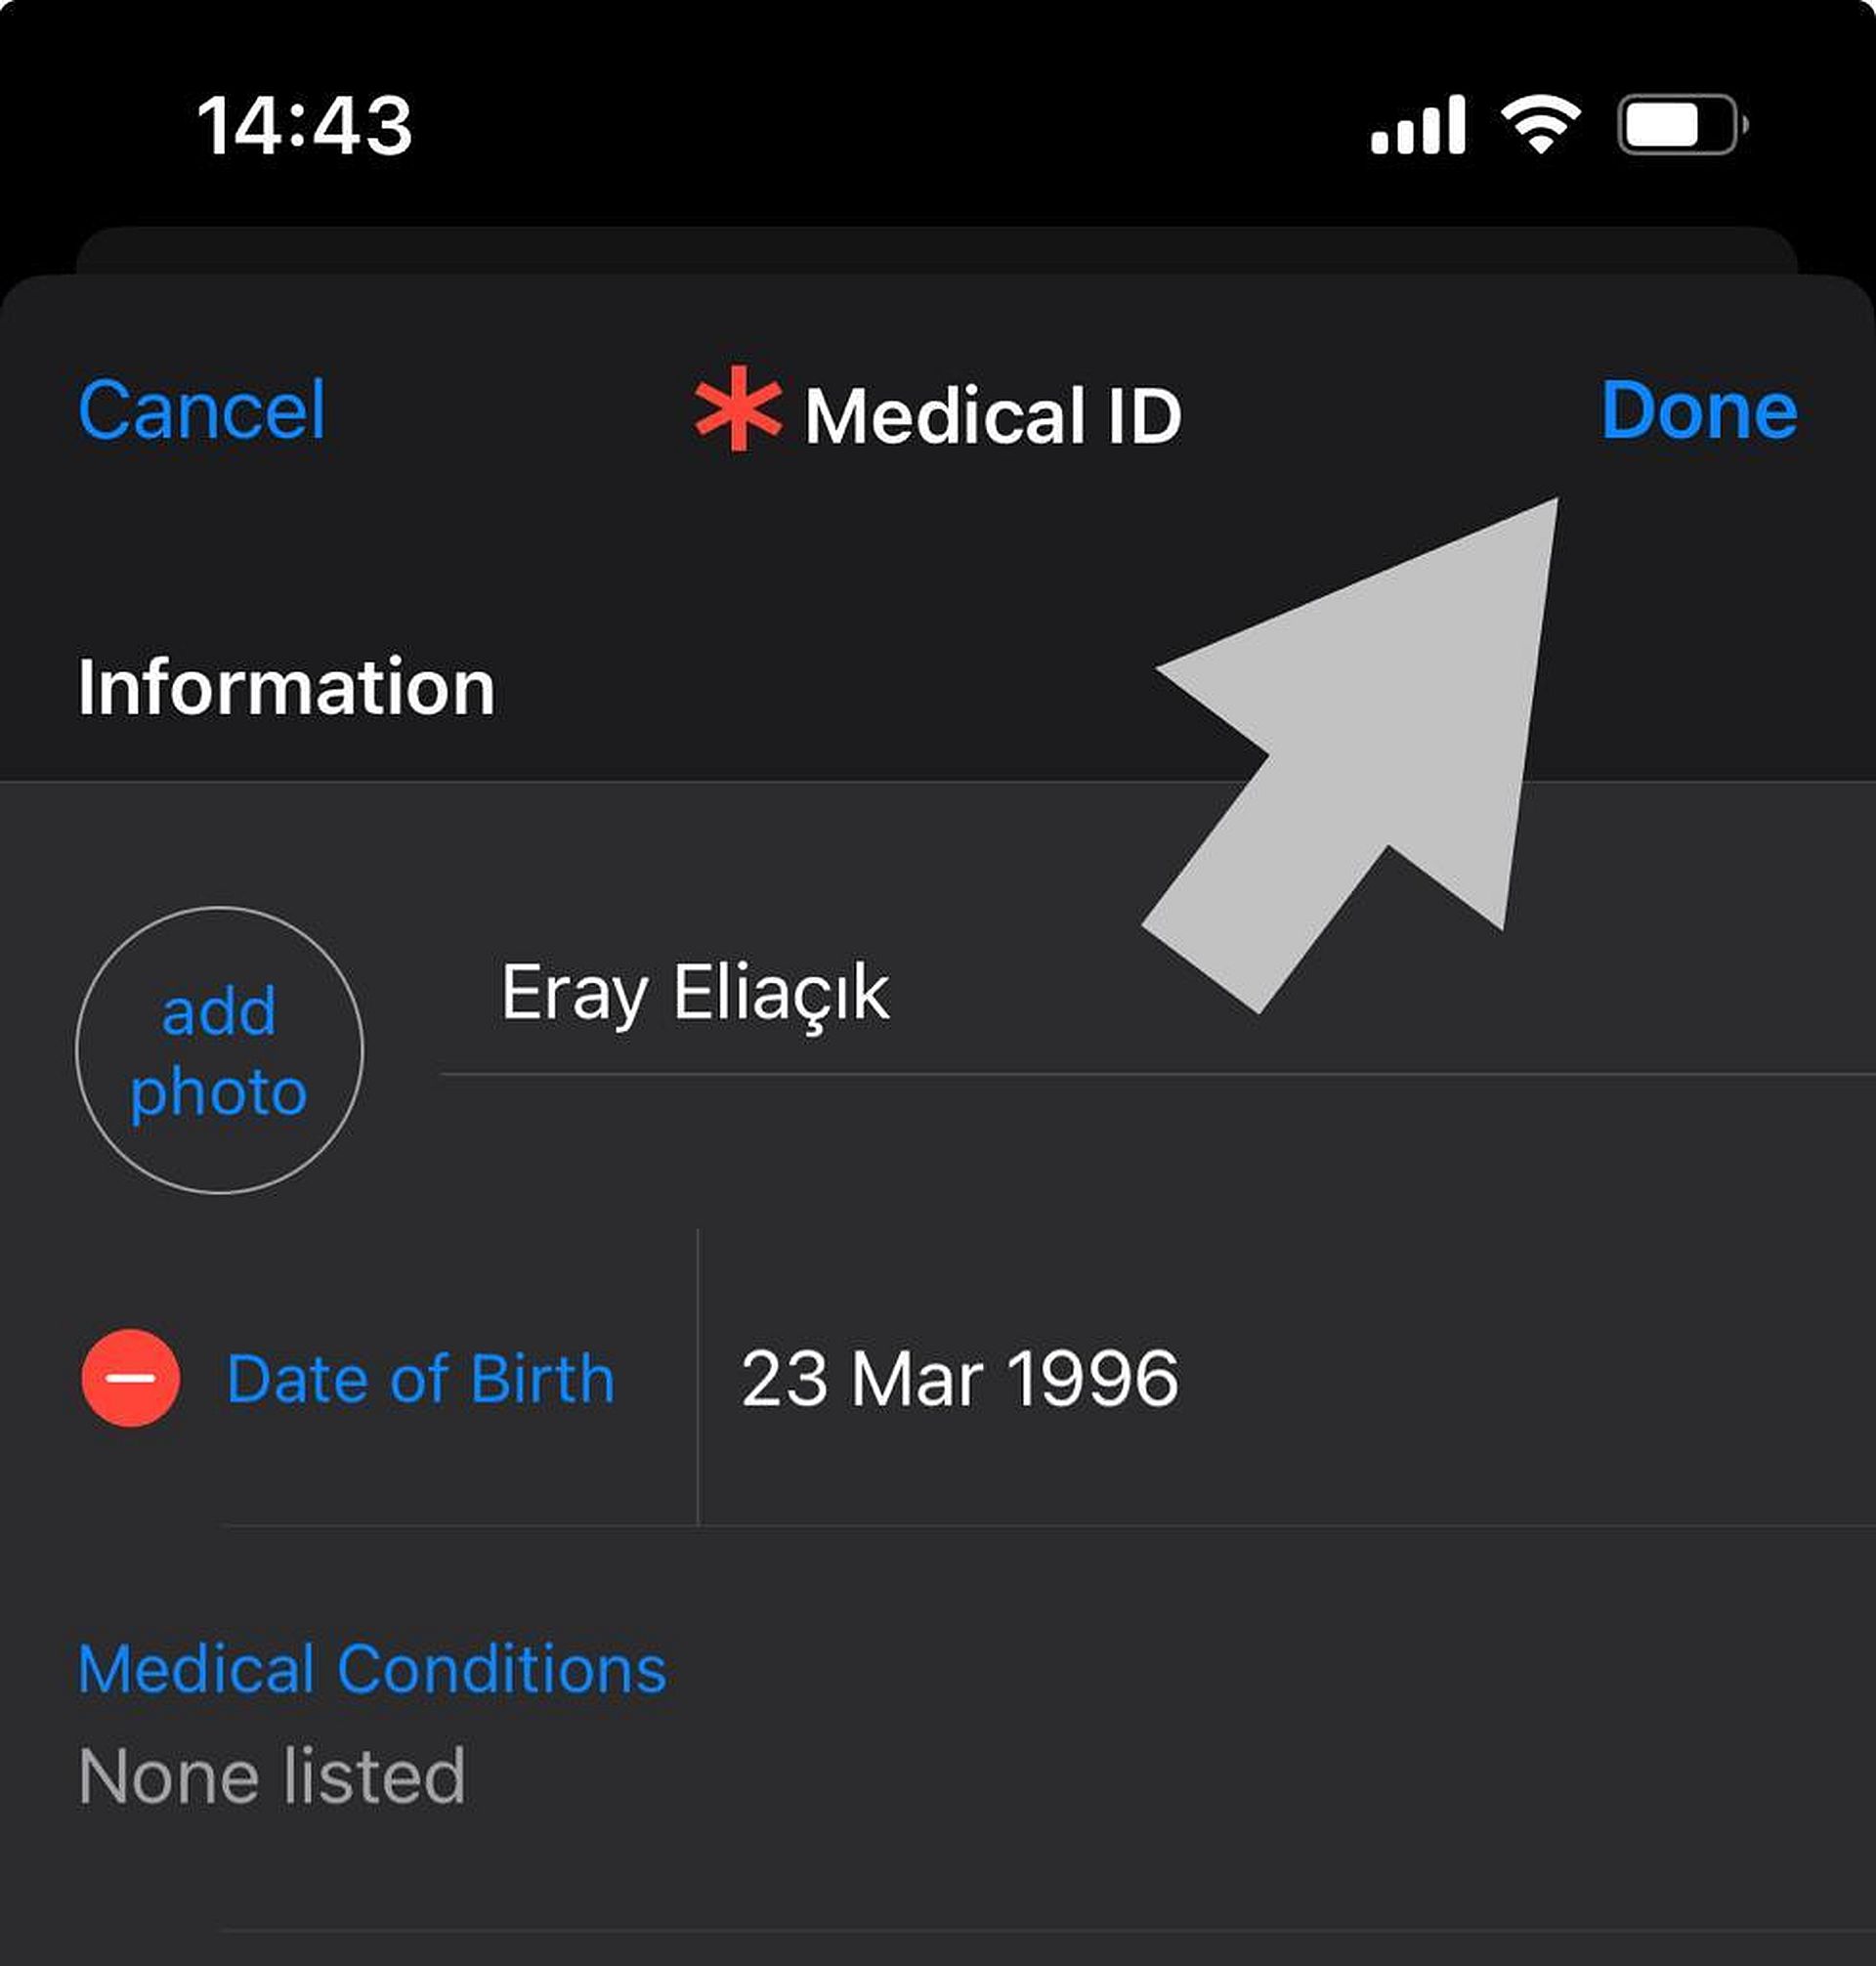 How to edit Medical ID on iPhone: 2 easy ways 